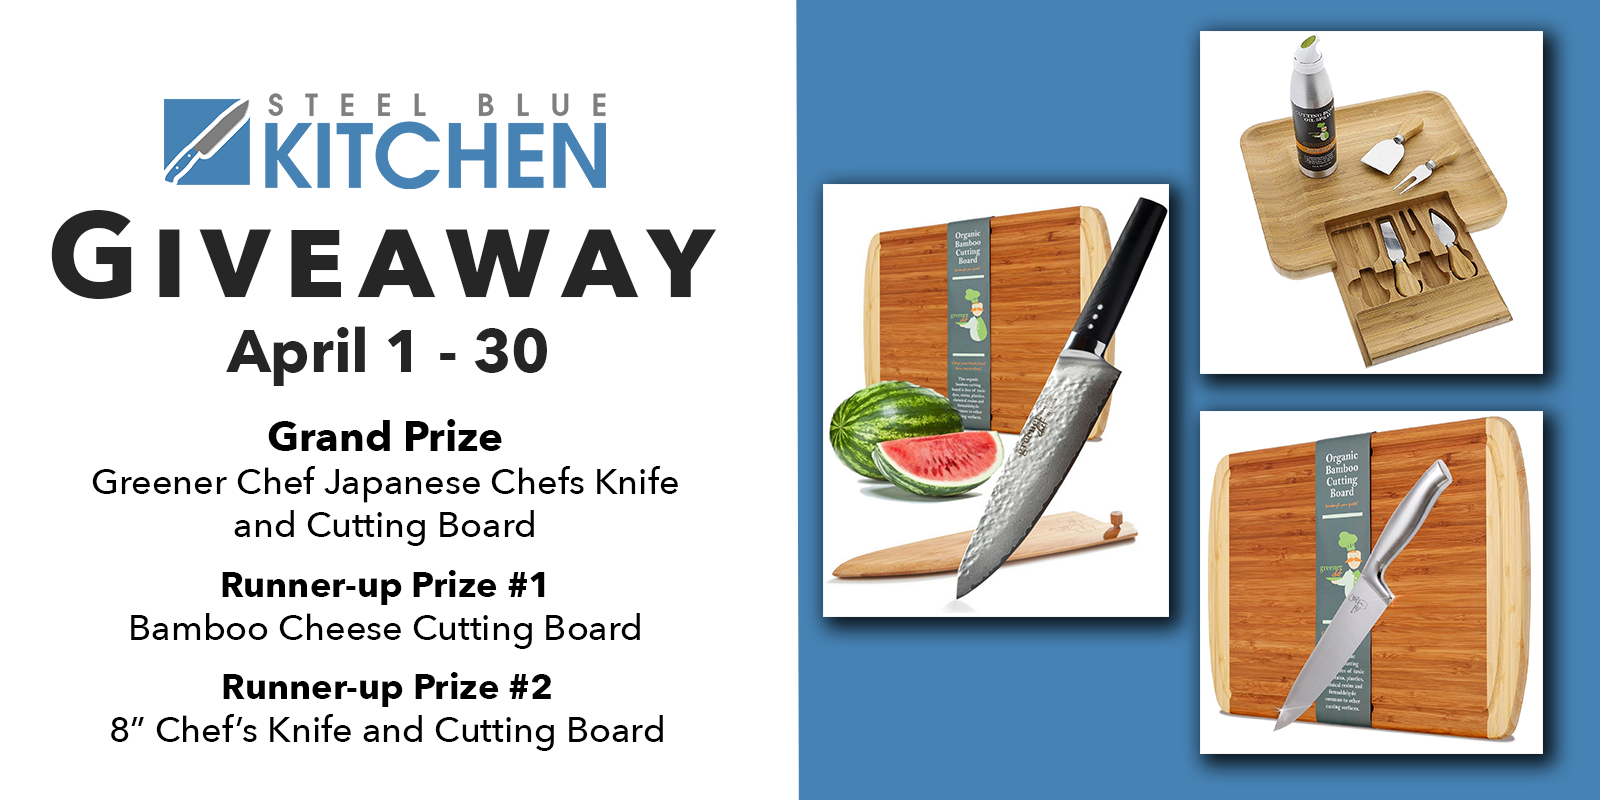 online contests, sweepstakes and giveaways - Greener Chef Japanese Chefs Knife and Cutting Board Giveaway | SteelBlue Kitchen